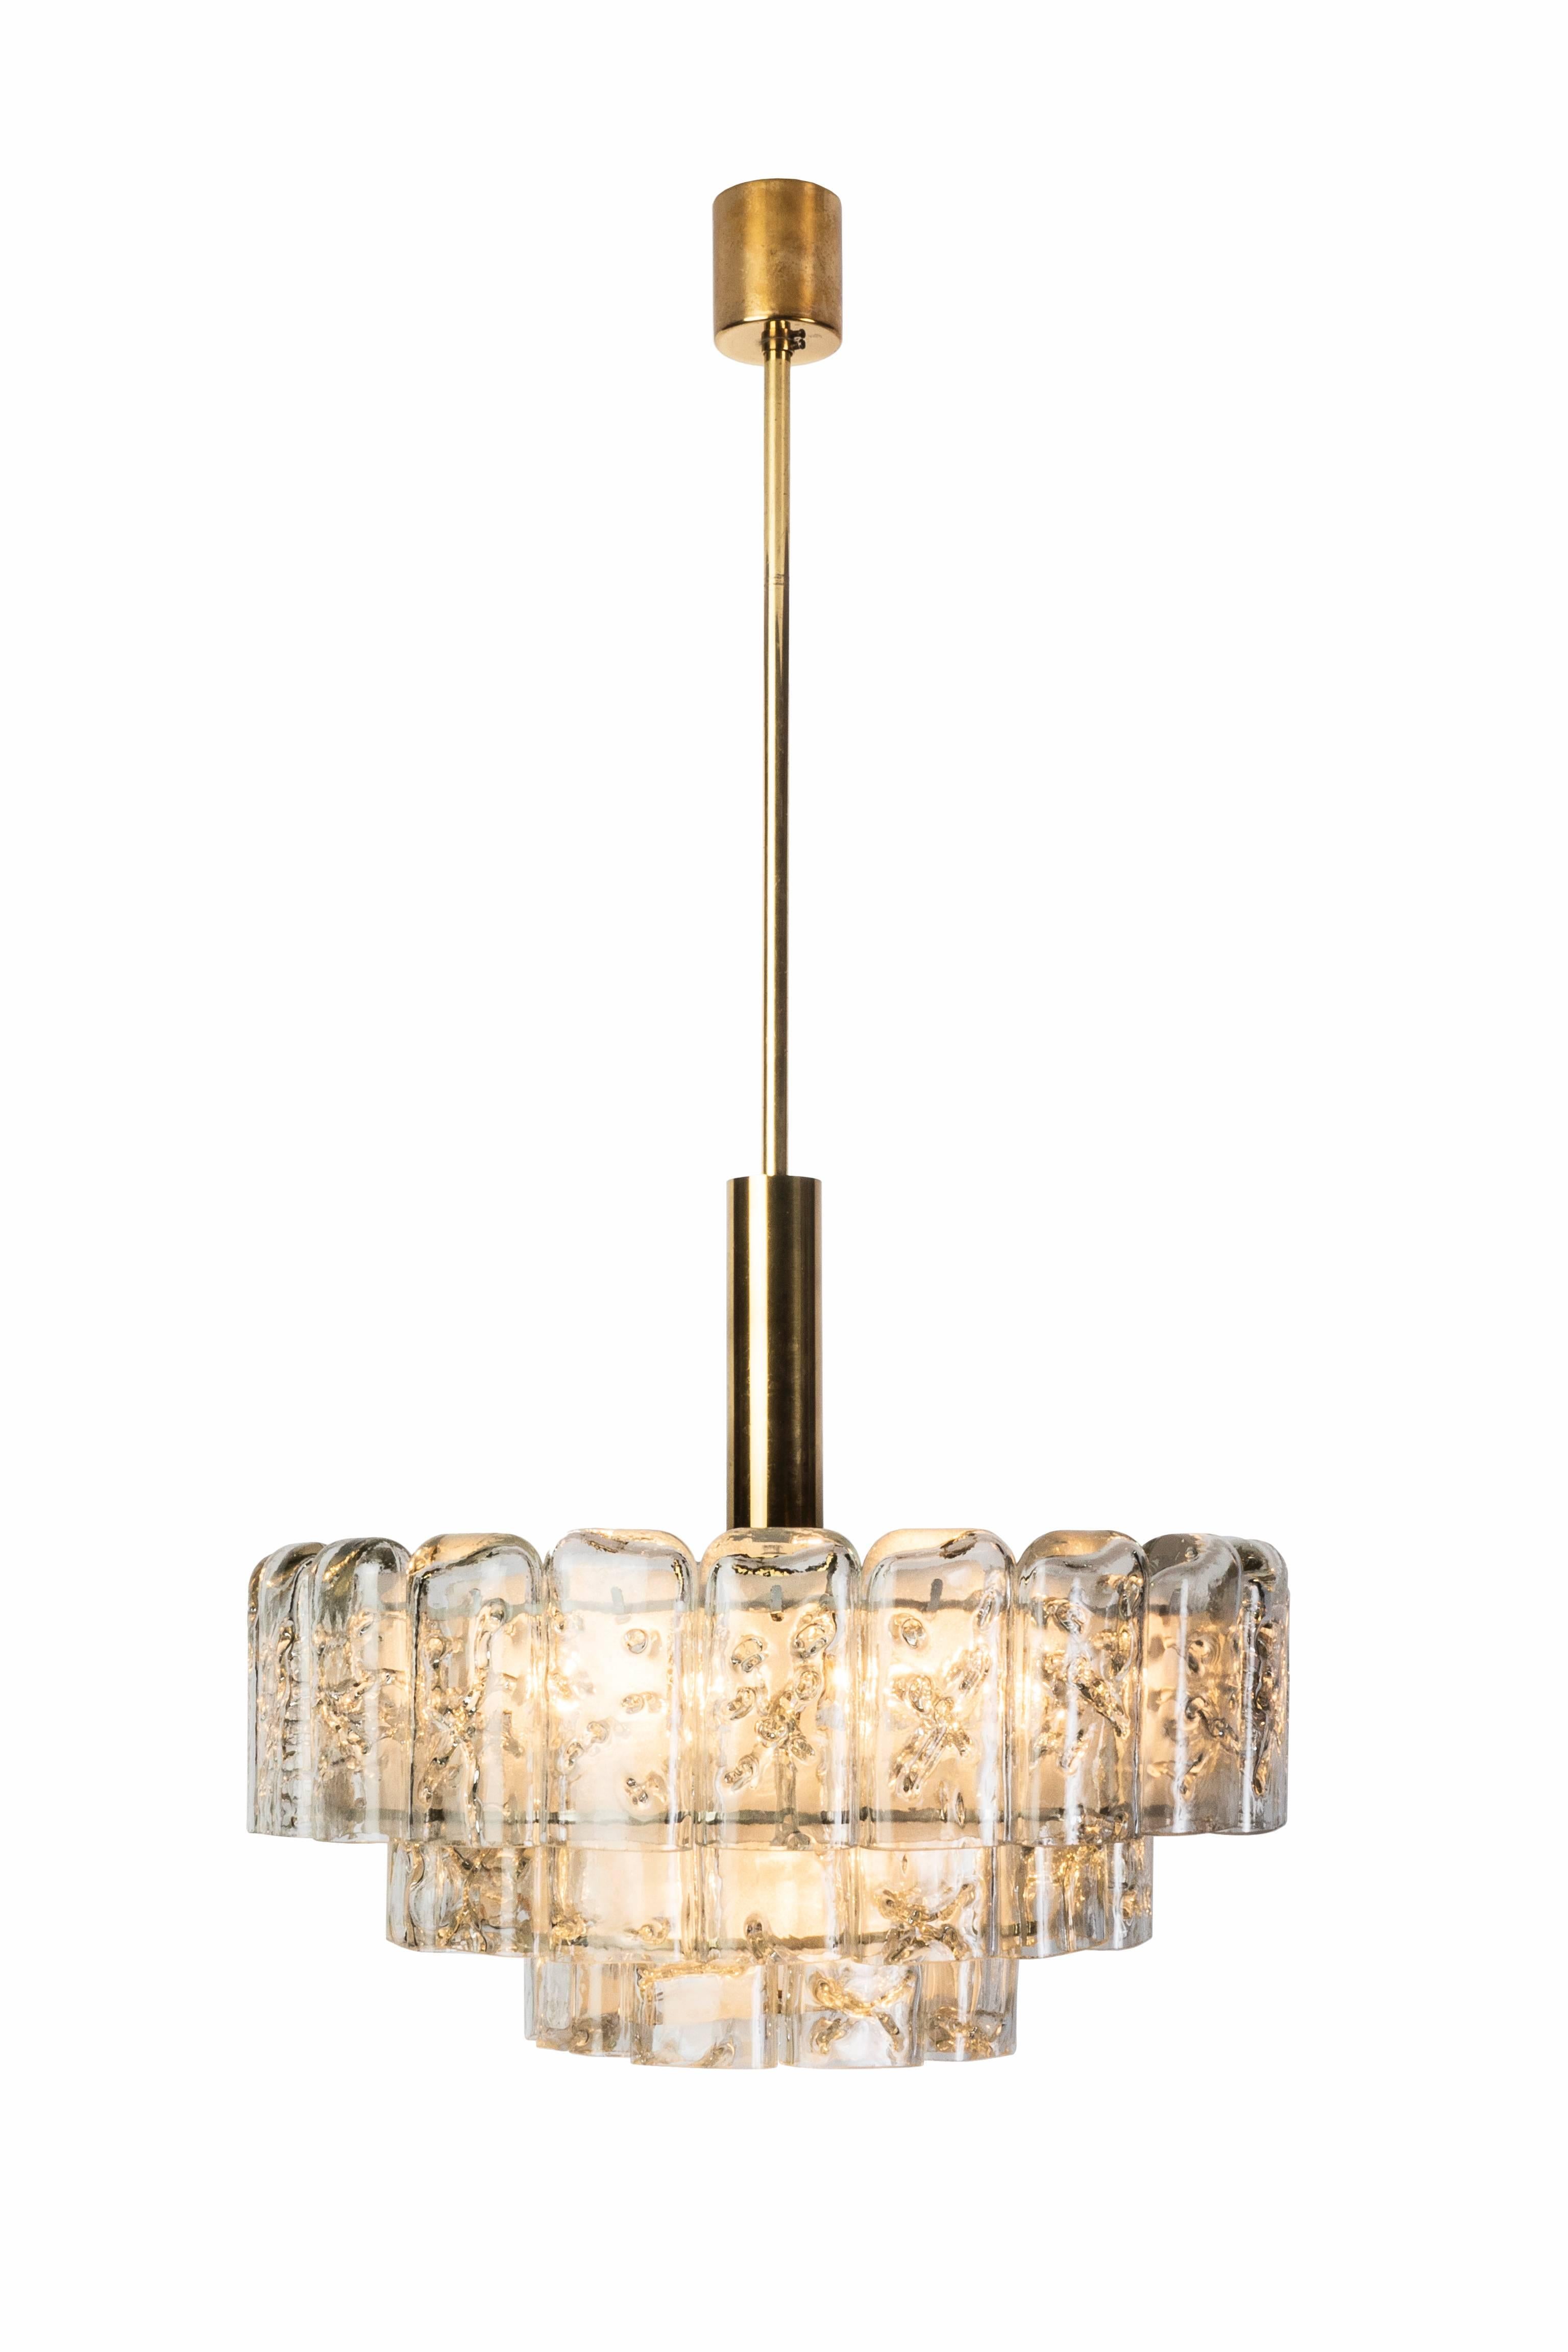 This gorgeous Mid-Century Modernist chandelier by Doria. It features a brass circular frame cascading into (three) tiers of textured bubble glass accents.
 

